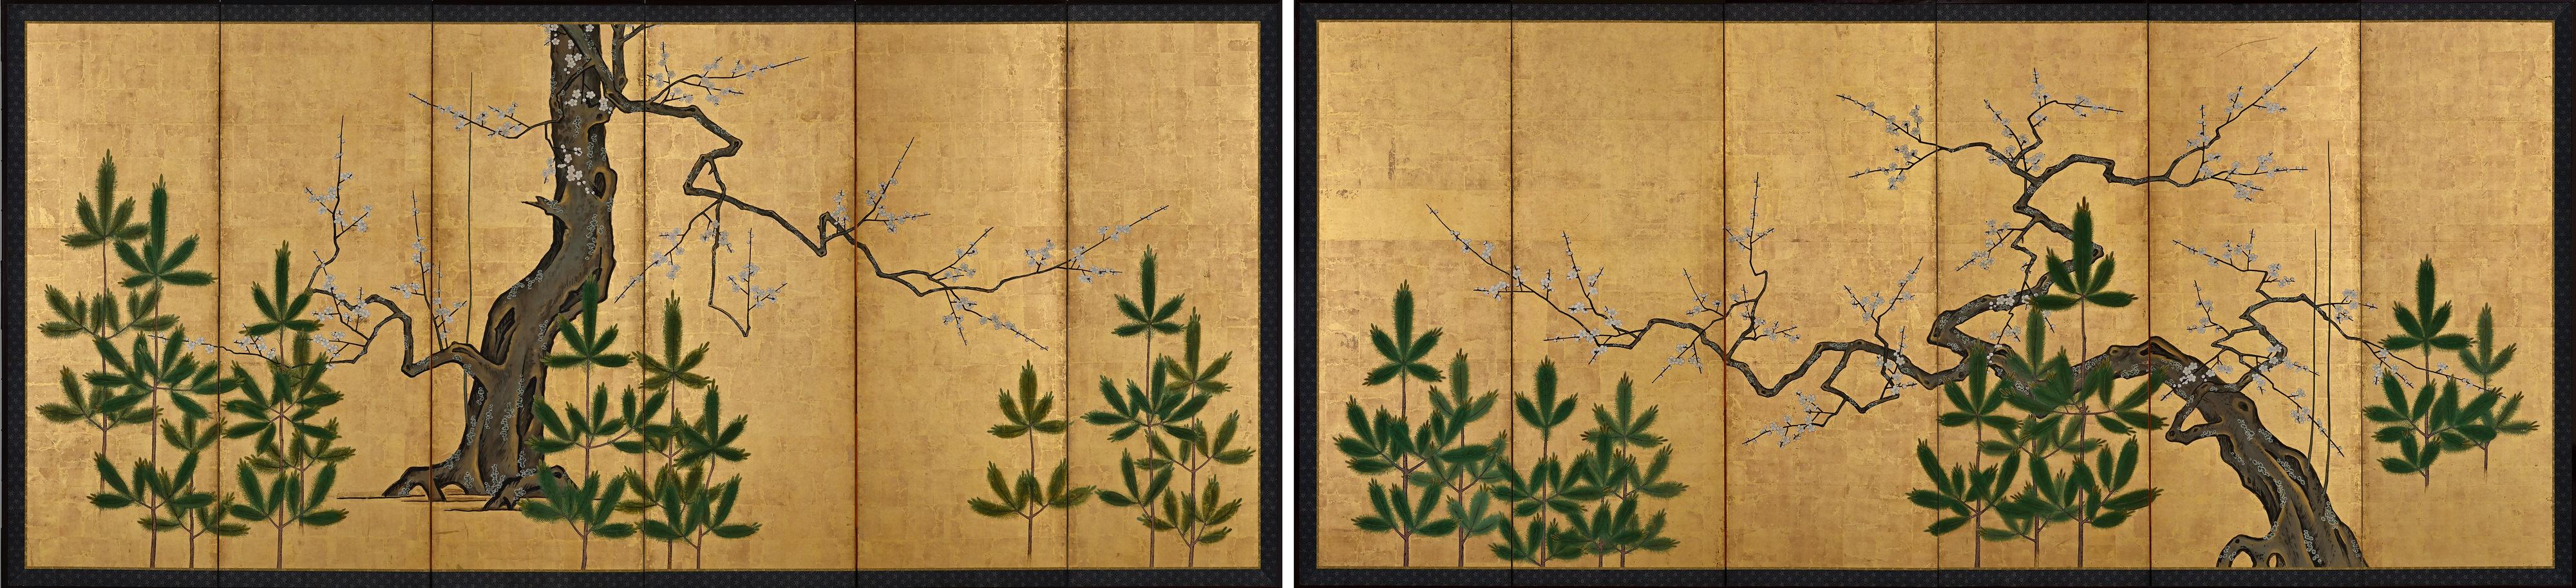 Dimensions (Each screen): H. 176 cm x W. 378 cm (69’’ x 149’’)

This pair of Japanese folding screens depict blossoming plum trees amongst young pines. They are designed to capture the changing seasons, from winter to spring, reflecting the cyclical